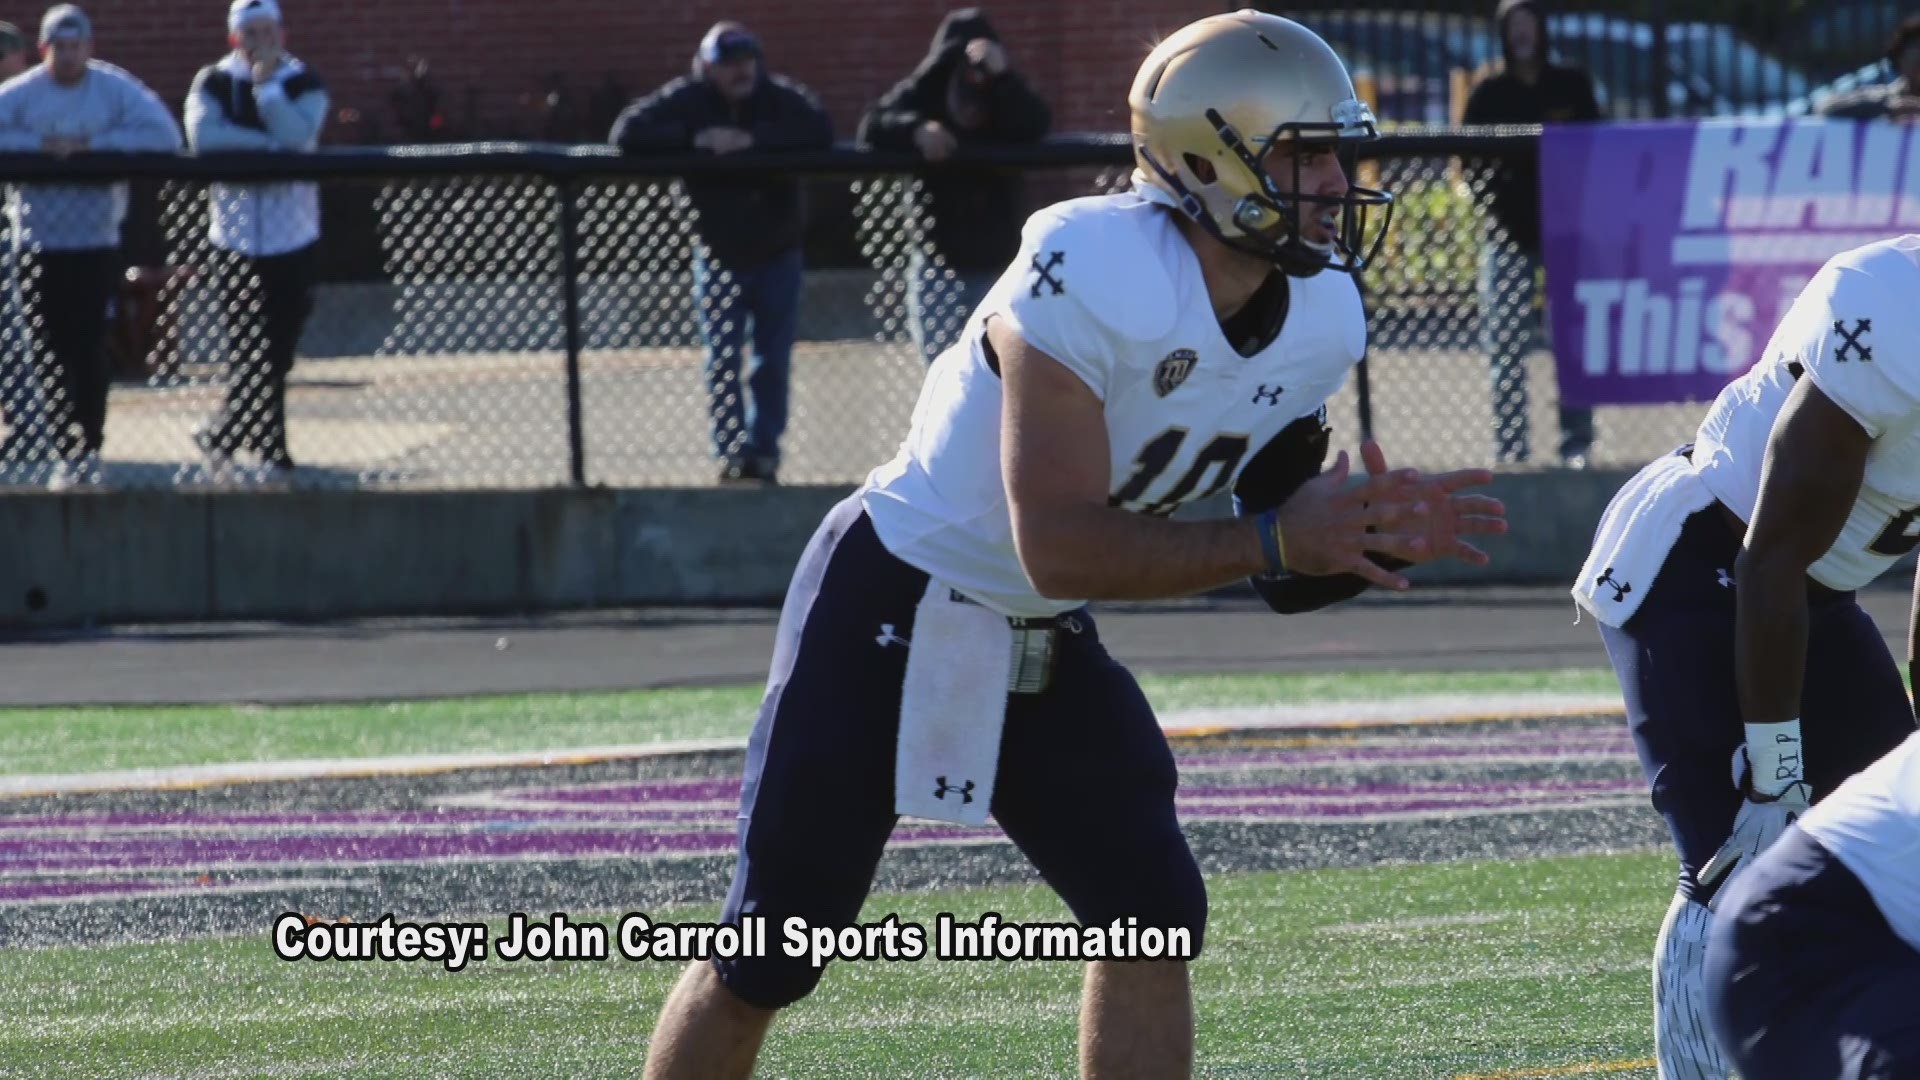 Fresh off an upset win over Mount Union, the John Carroll Blue Streaks are ready for their first-round playoff matchup against Olivet.